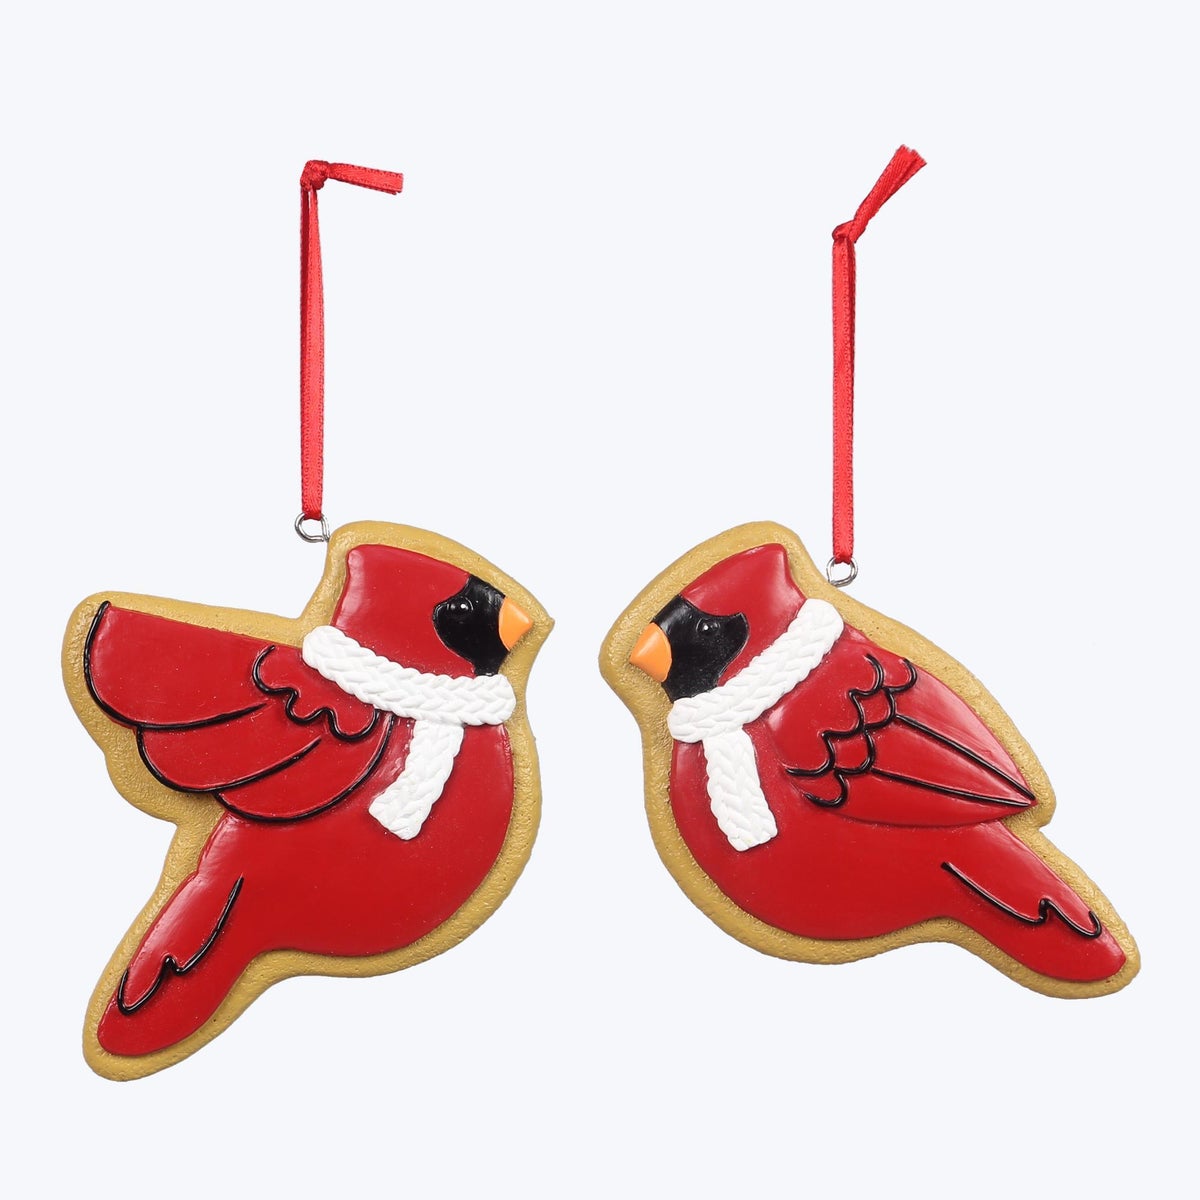 Resin Cocoa and Cookies Cardinal Christmas Ornaments, 2 Ast